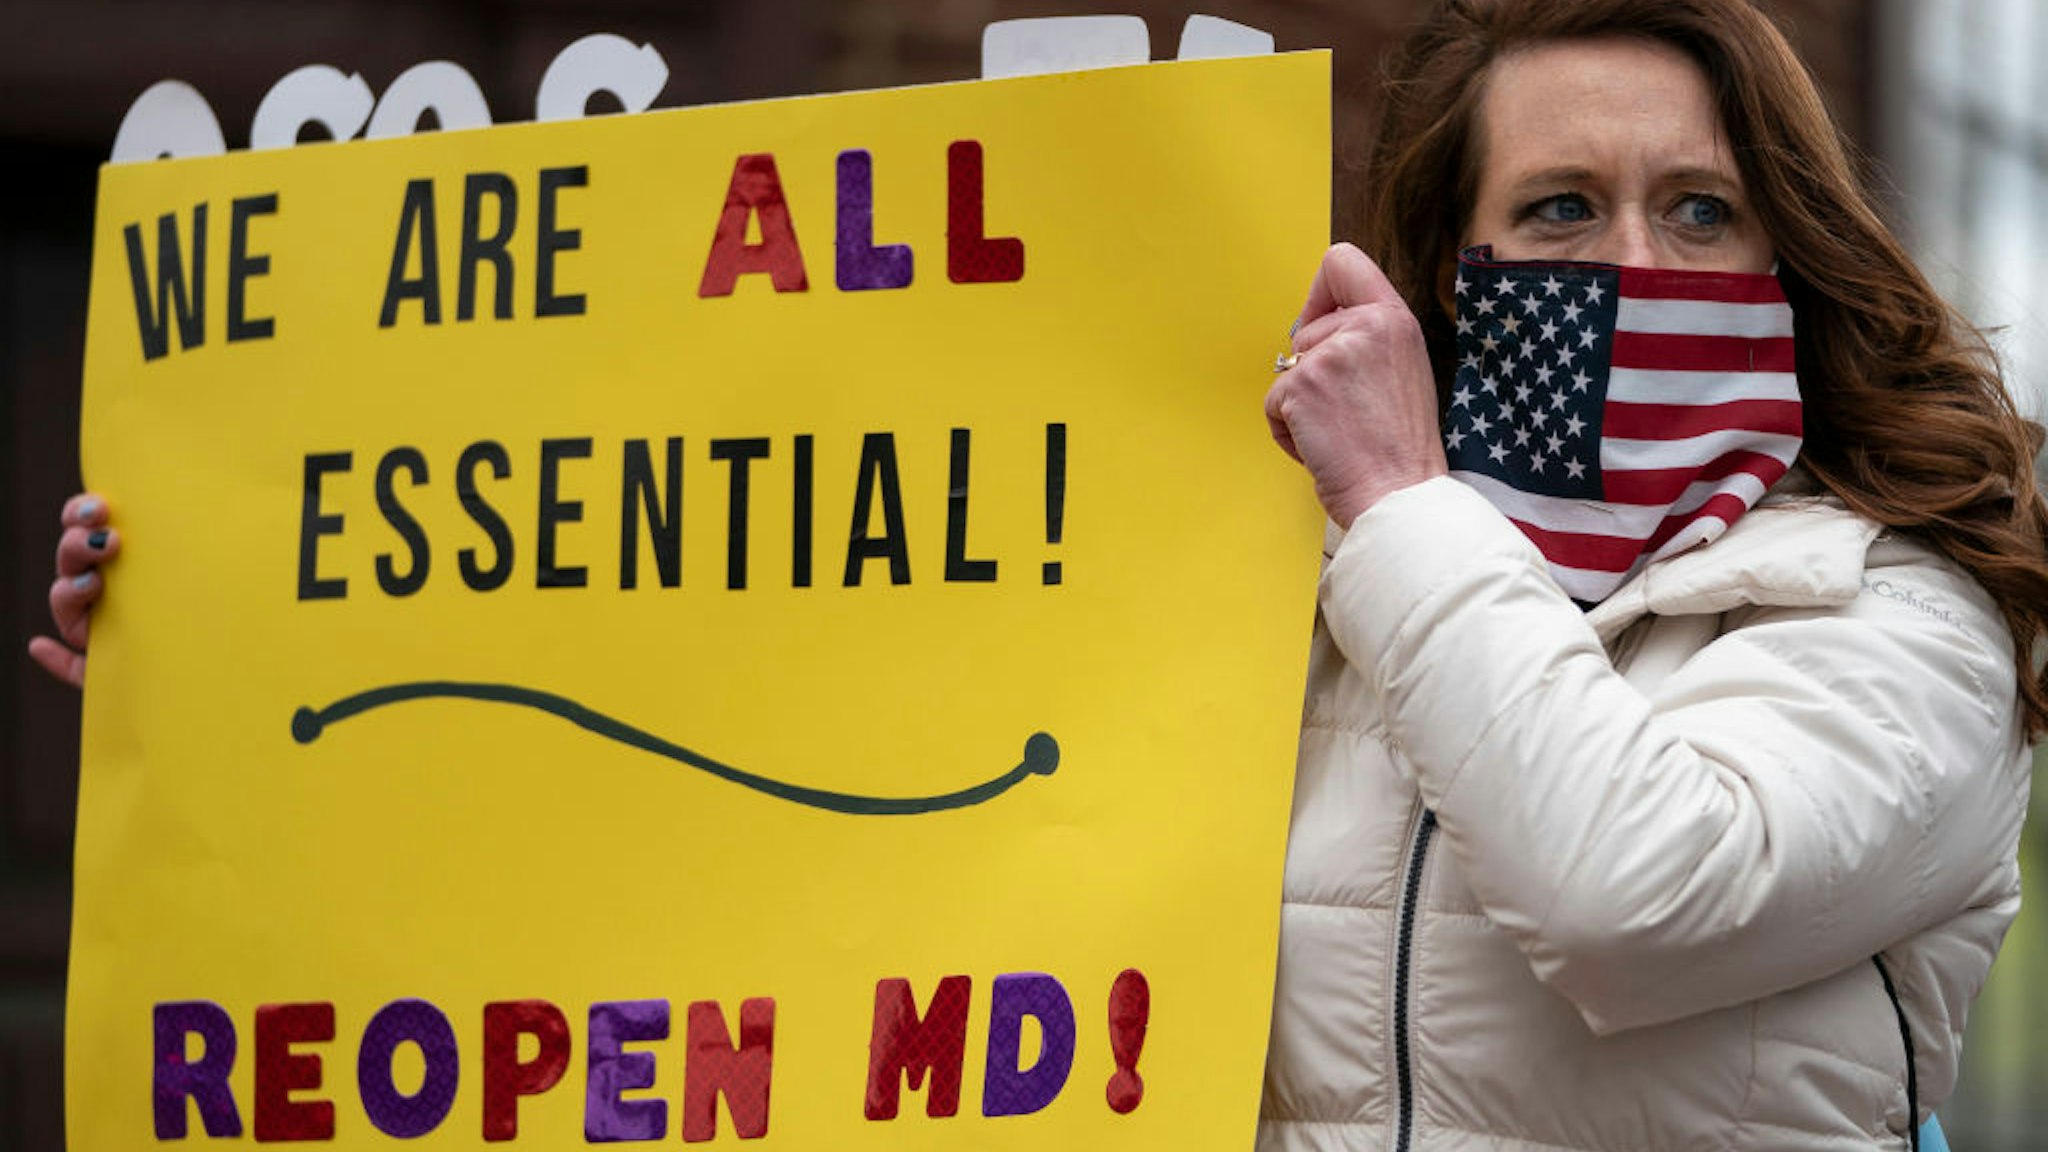 ANNAPOLIS, MD - APRIL 18: Protesters with the group Reopen Maryland rally near the State House to call on the state to lift the stay-at-home order and reopen the economy on April 18, 2020 in Annapolis, Maryland. Most protestors rallied from inside their cars as they caused gridlock in a traffic circle and a smaller group protested outside of their cars. (Photo by Drew Angerer/Getty Images)